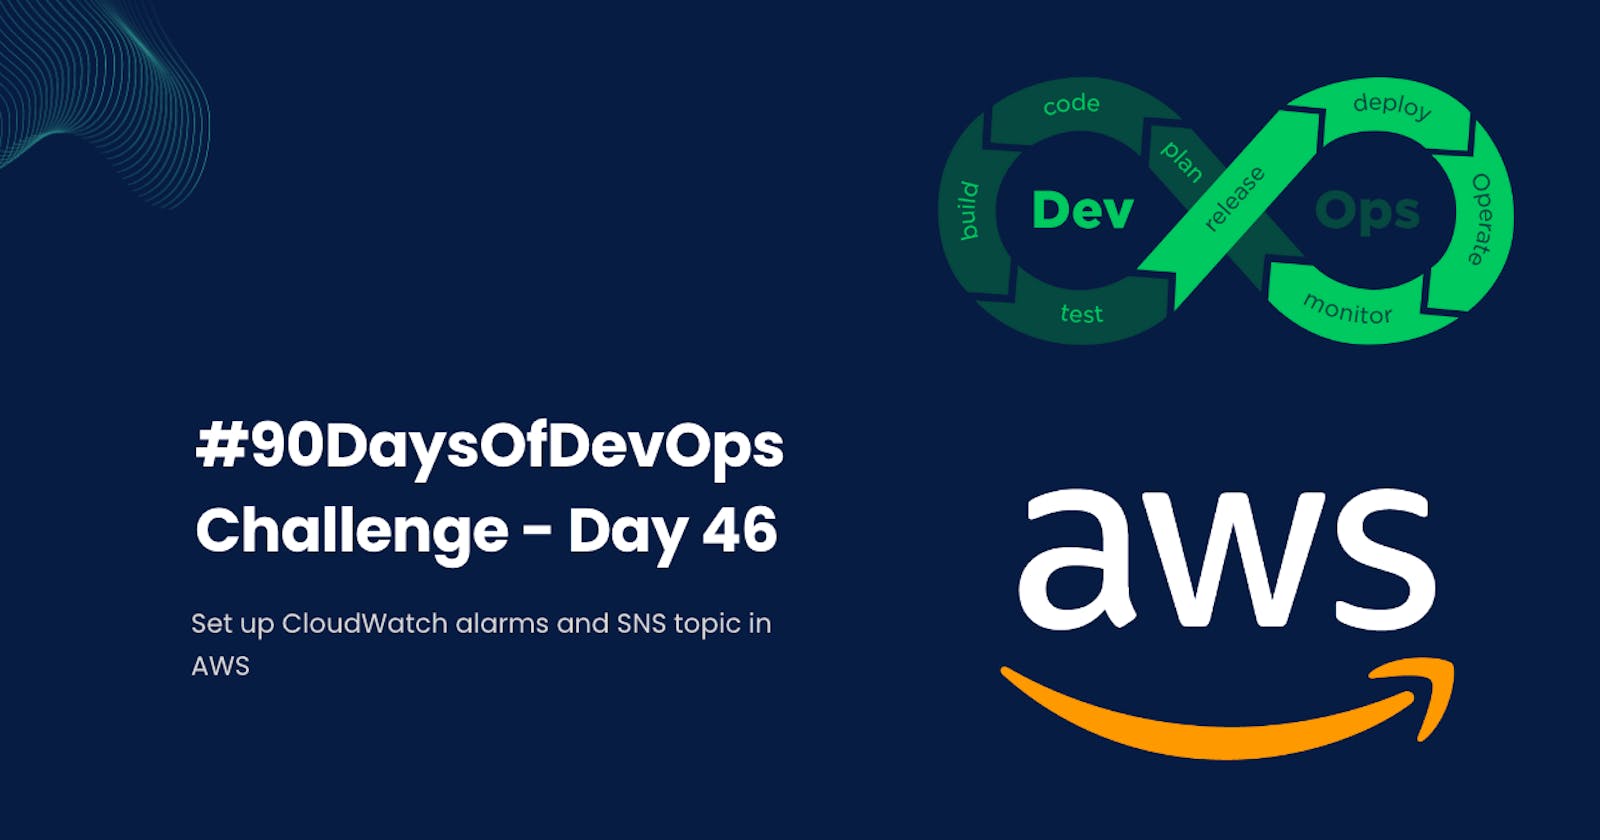 #90DaysOfDevOps Challenge - Day 46 - Set up CloudWatch alarms and SNS topic in AWS